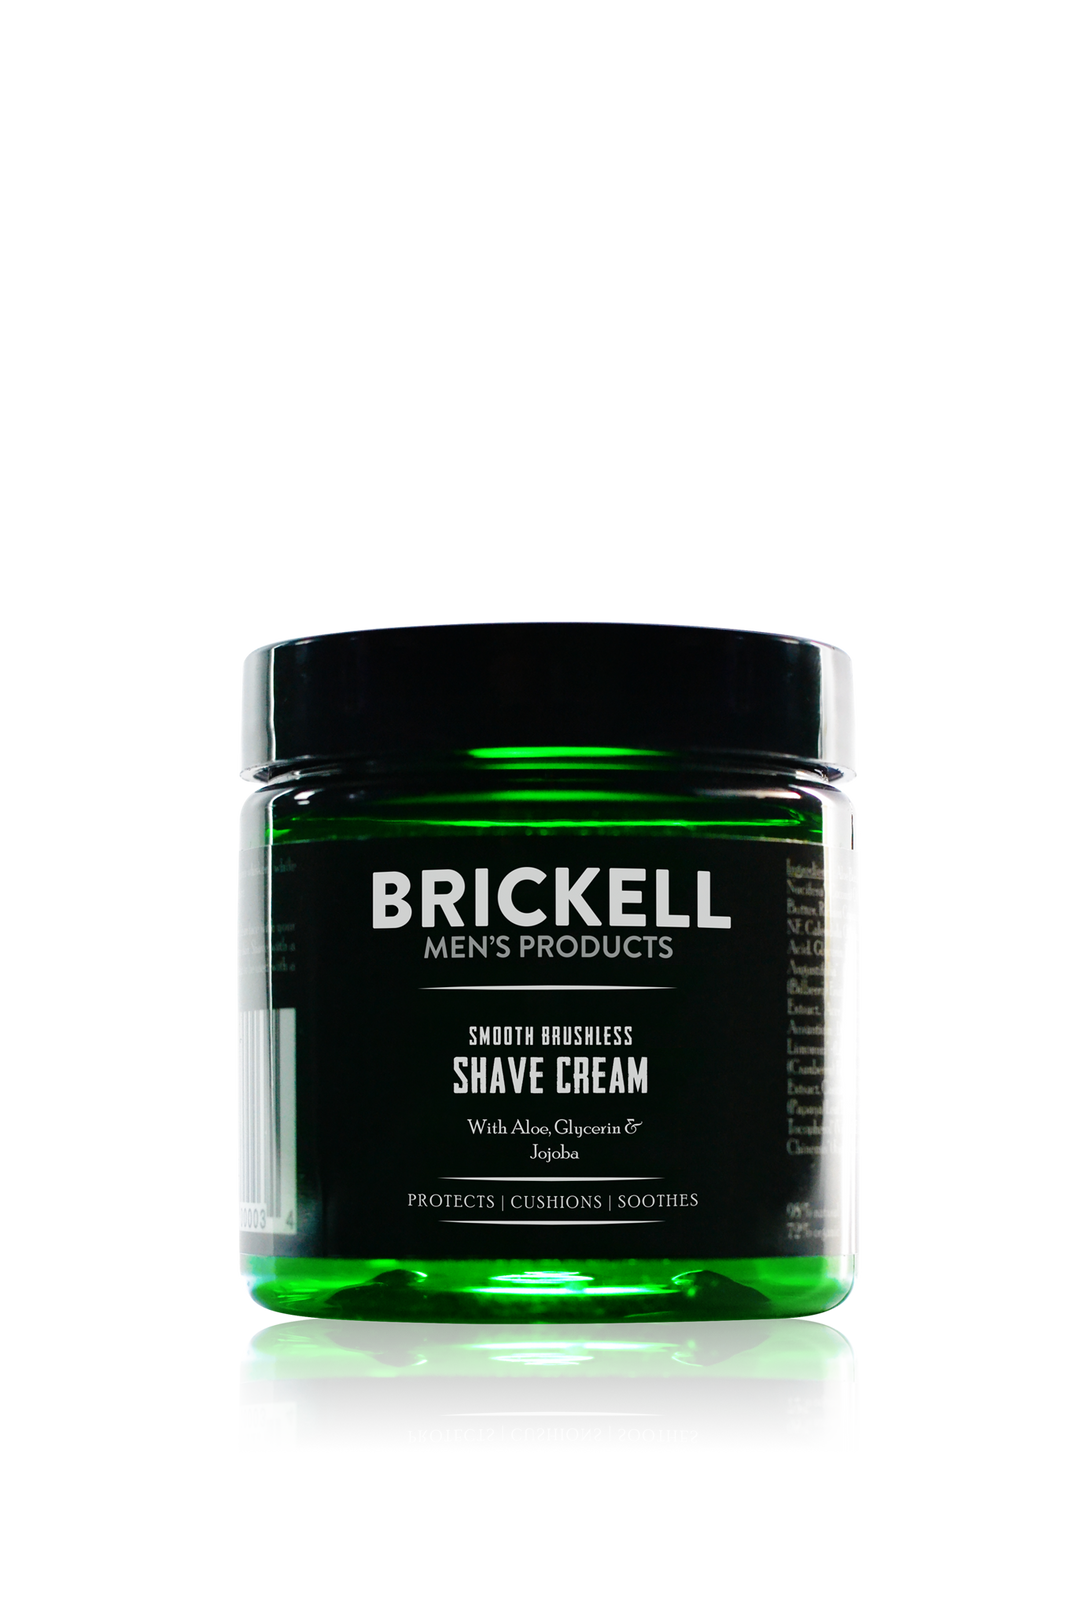 Brickell Men's Products Smooth Brushless Shave Cream